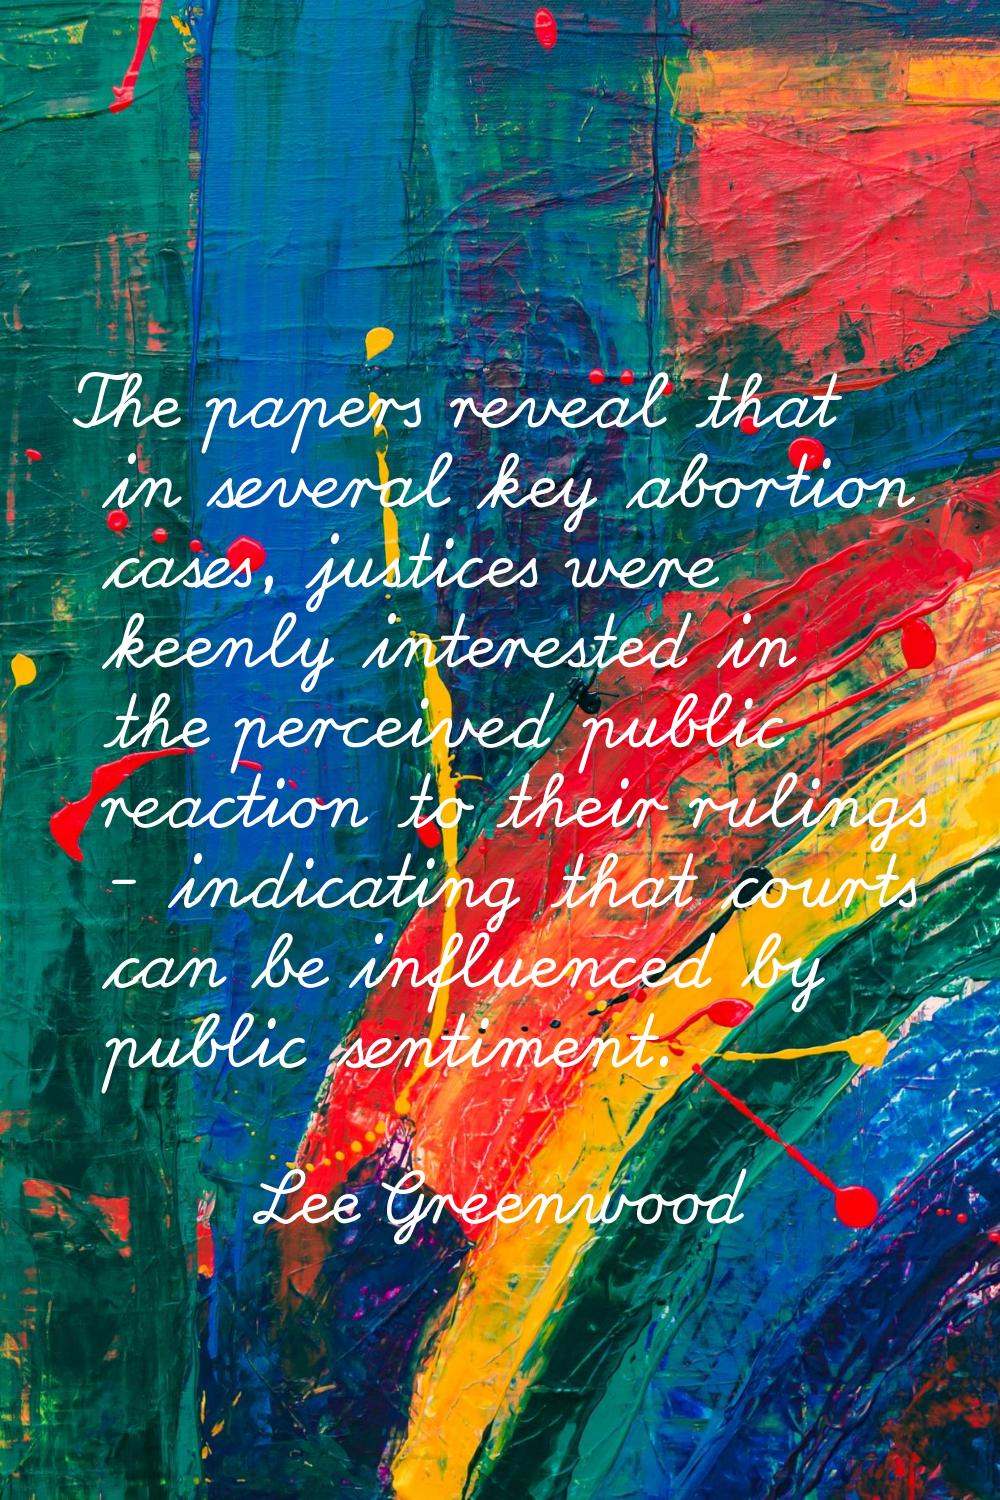 The papers reveal that in several key abortion cases, justices were keenly interested in the percei